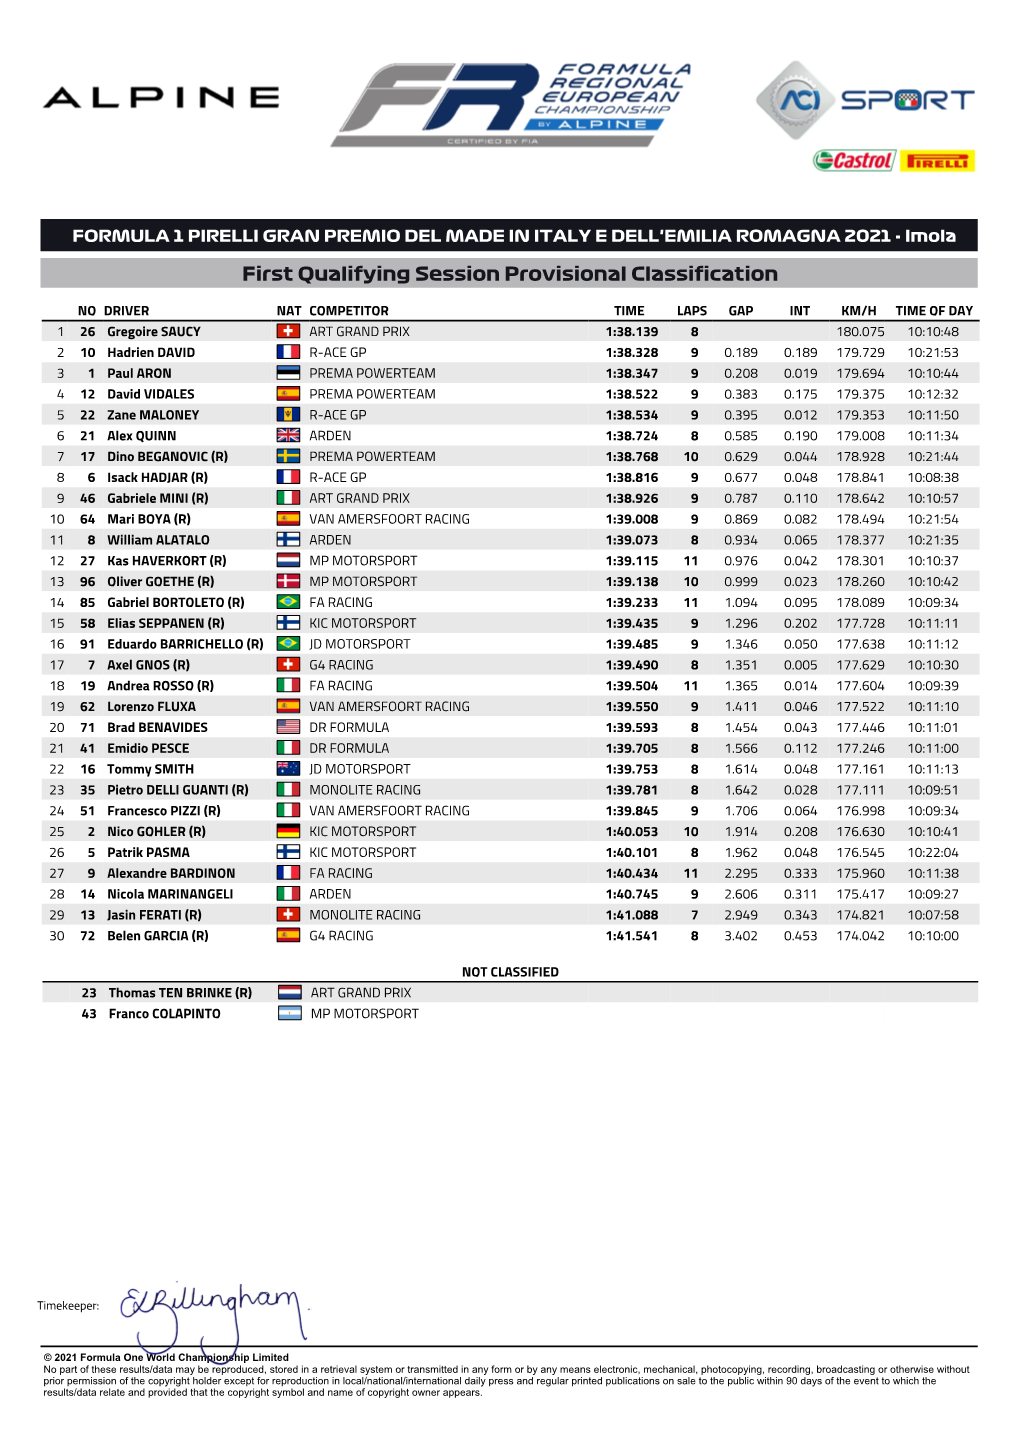 First Qualifying Session Provisional Classification